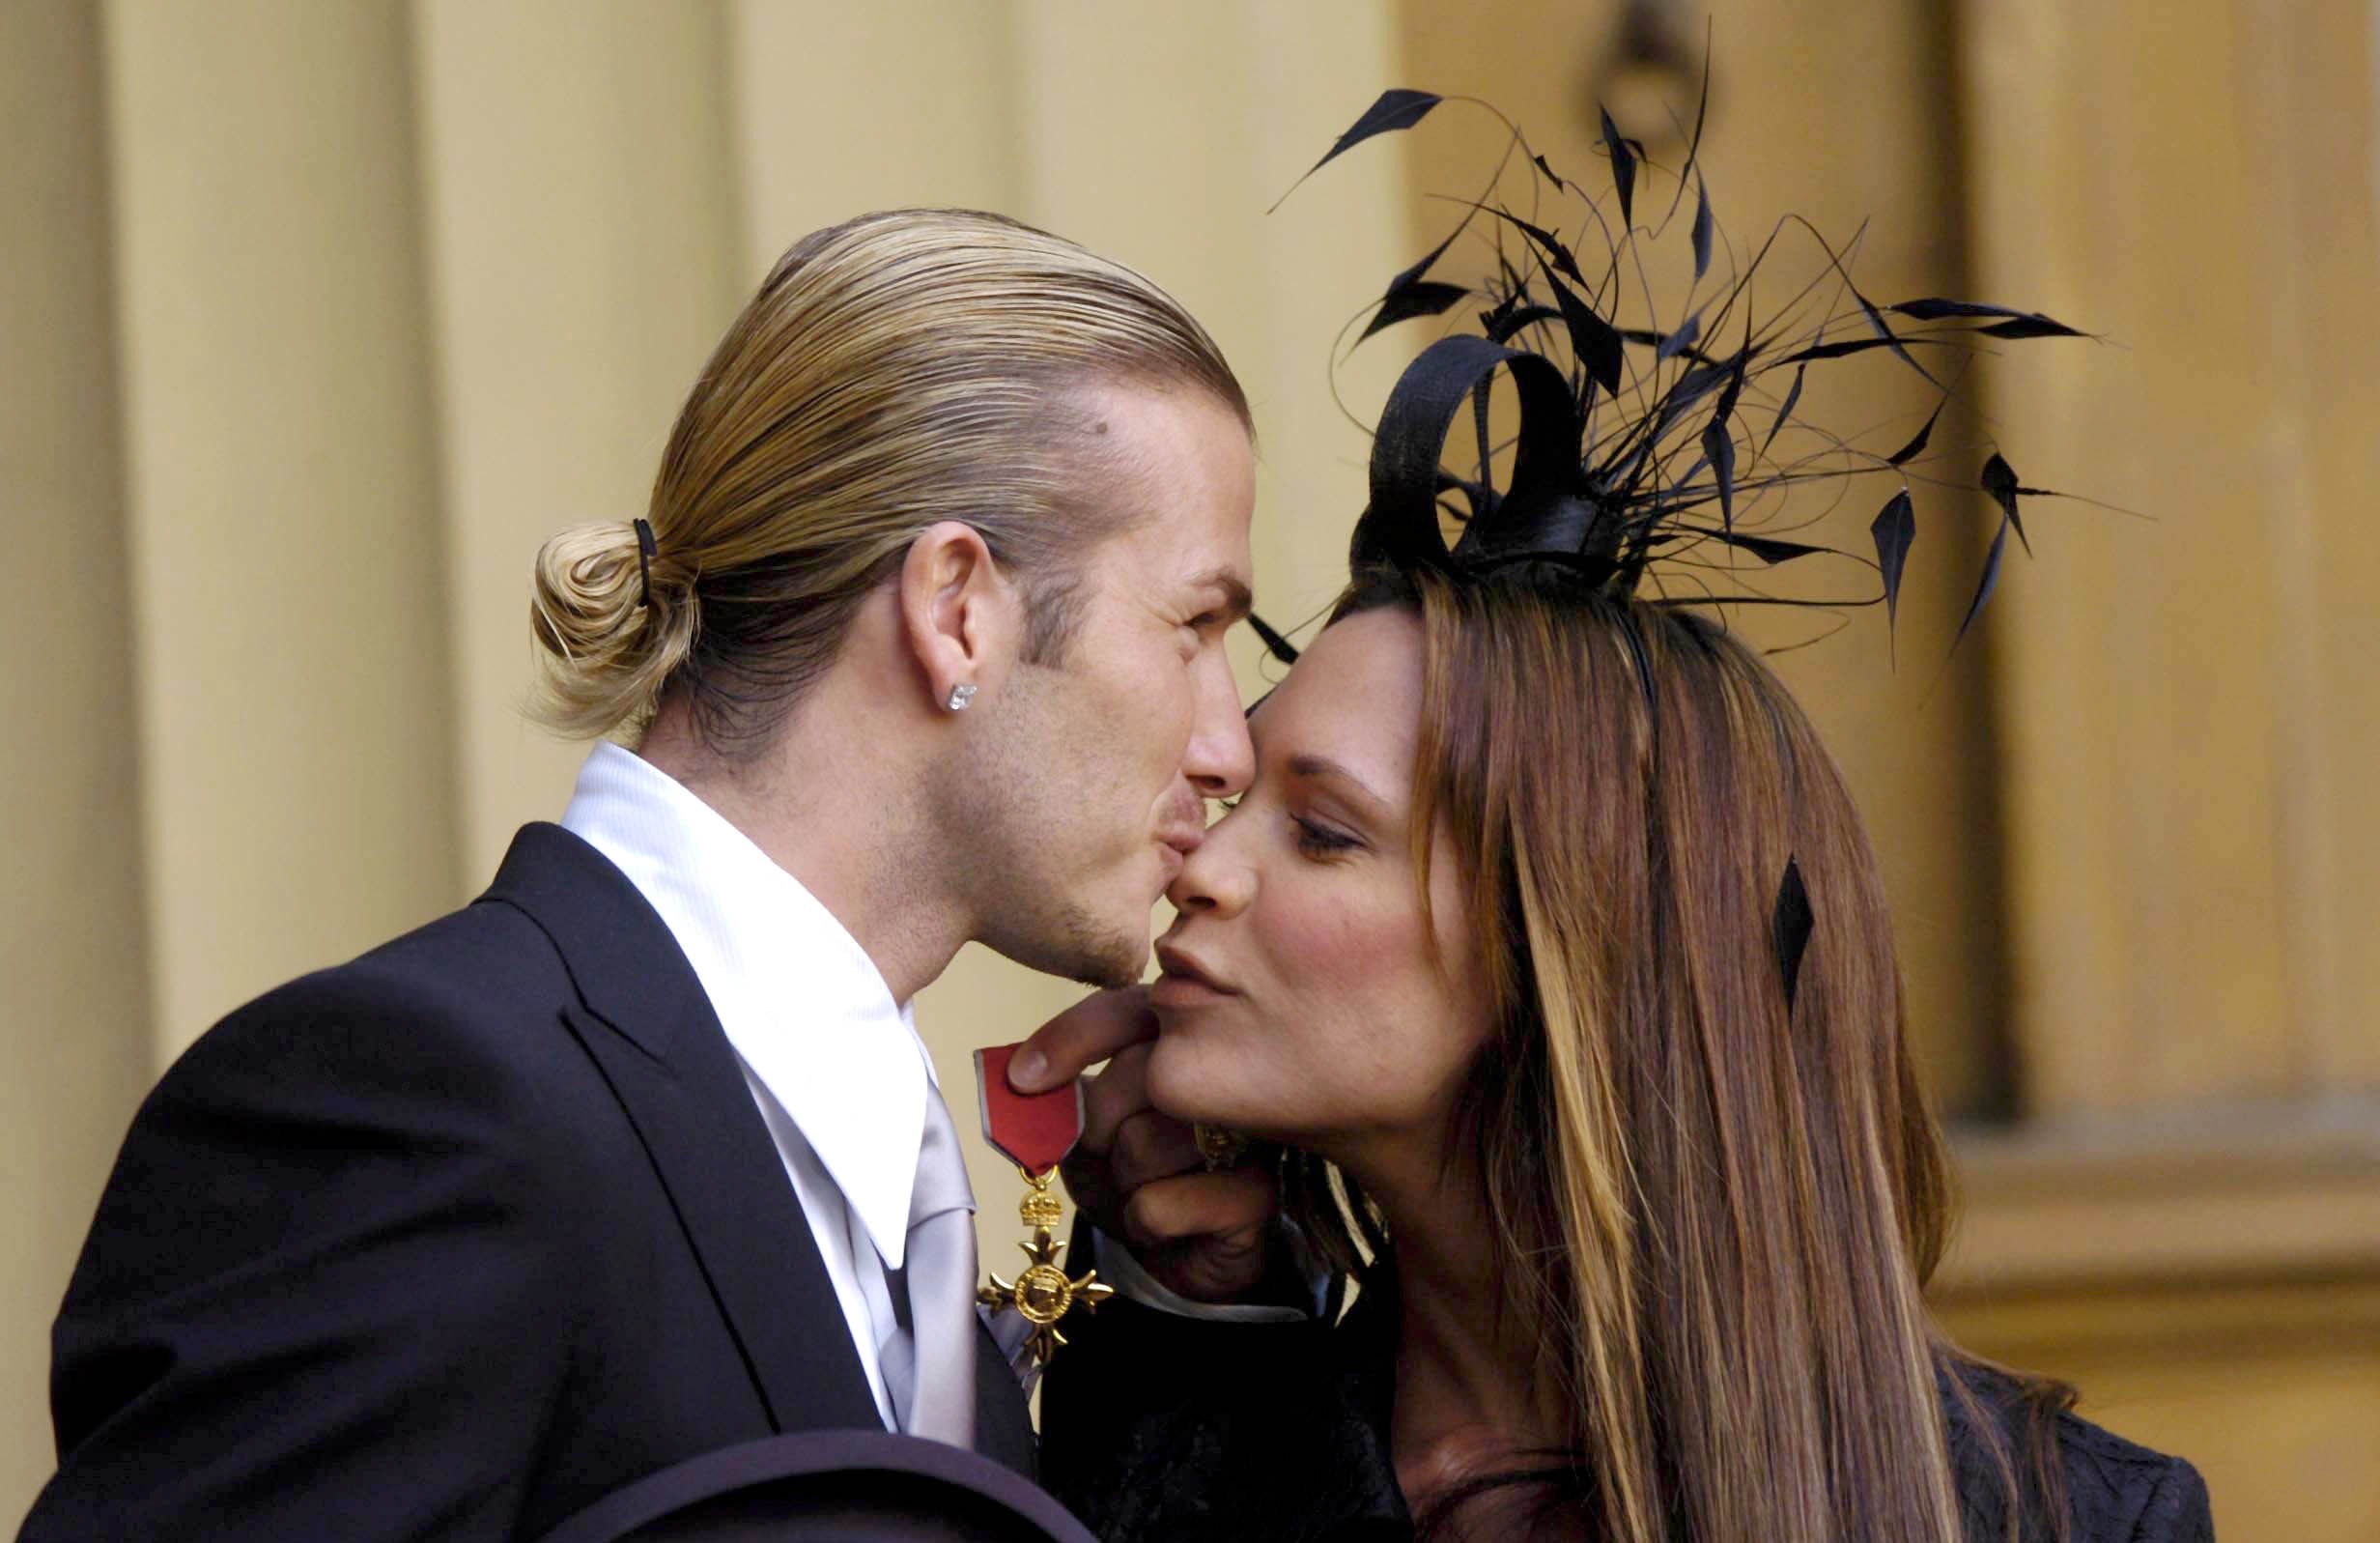 David plants a gentle kiss on Victoria’s nose after being awarded an OBE at Buckingham Palace in 2003